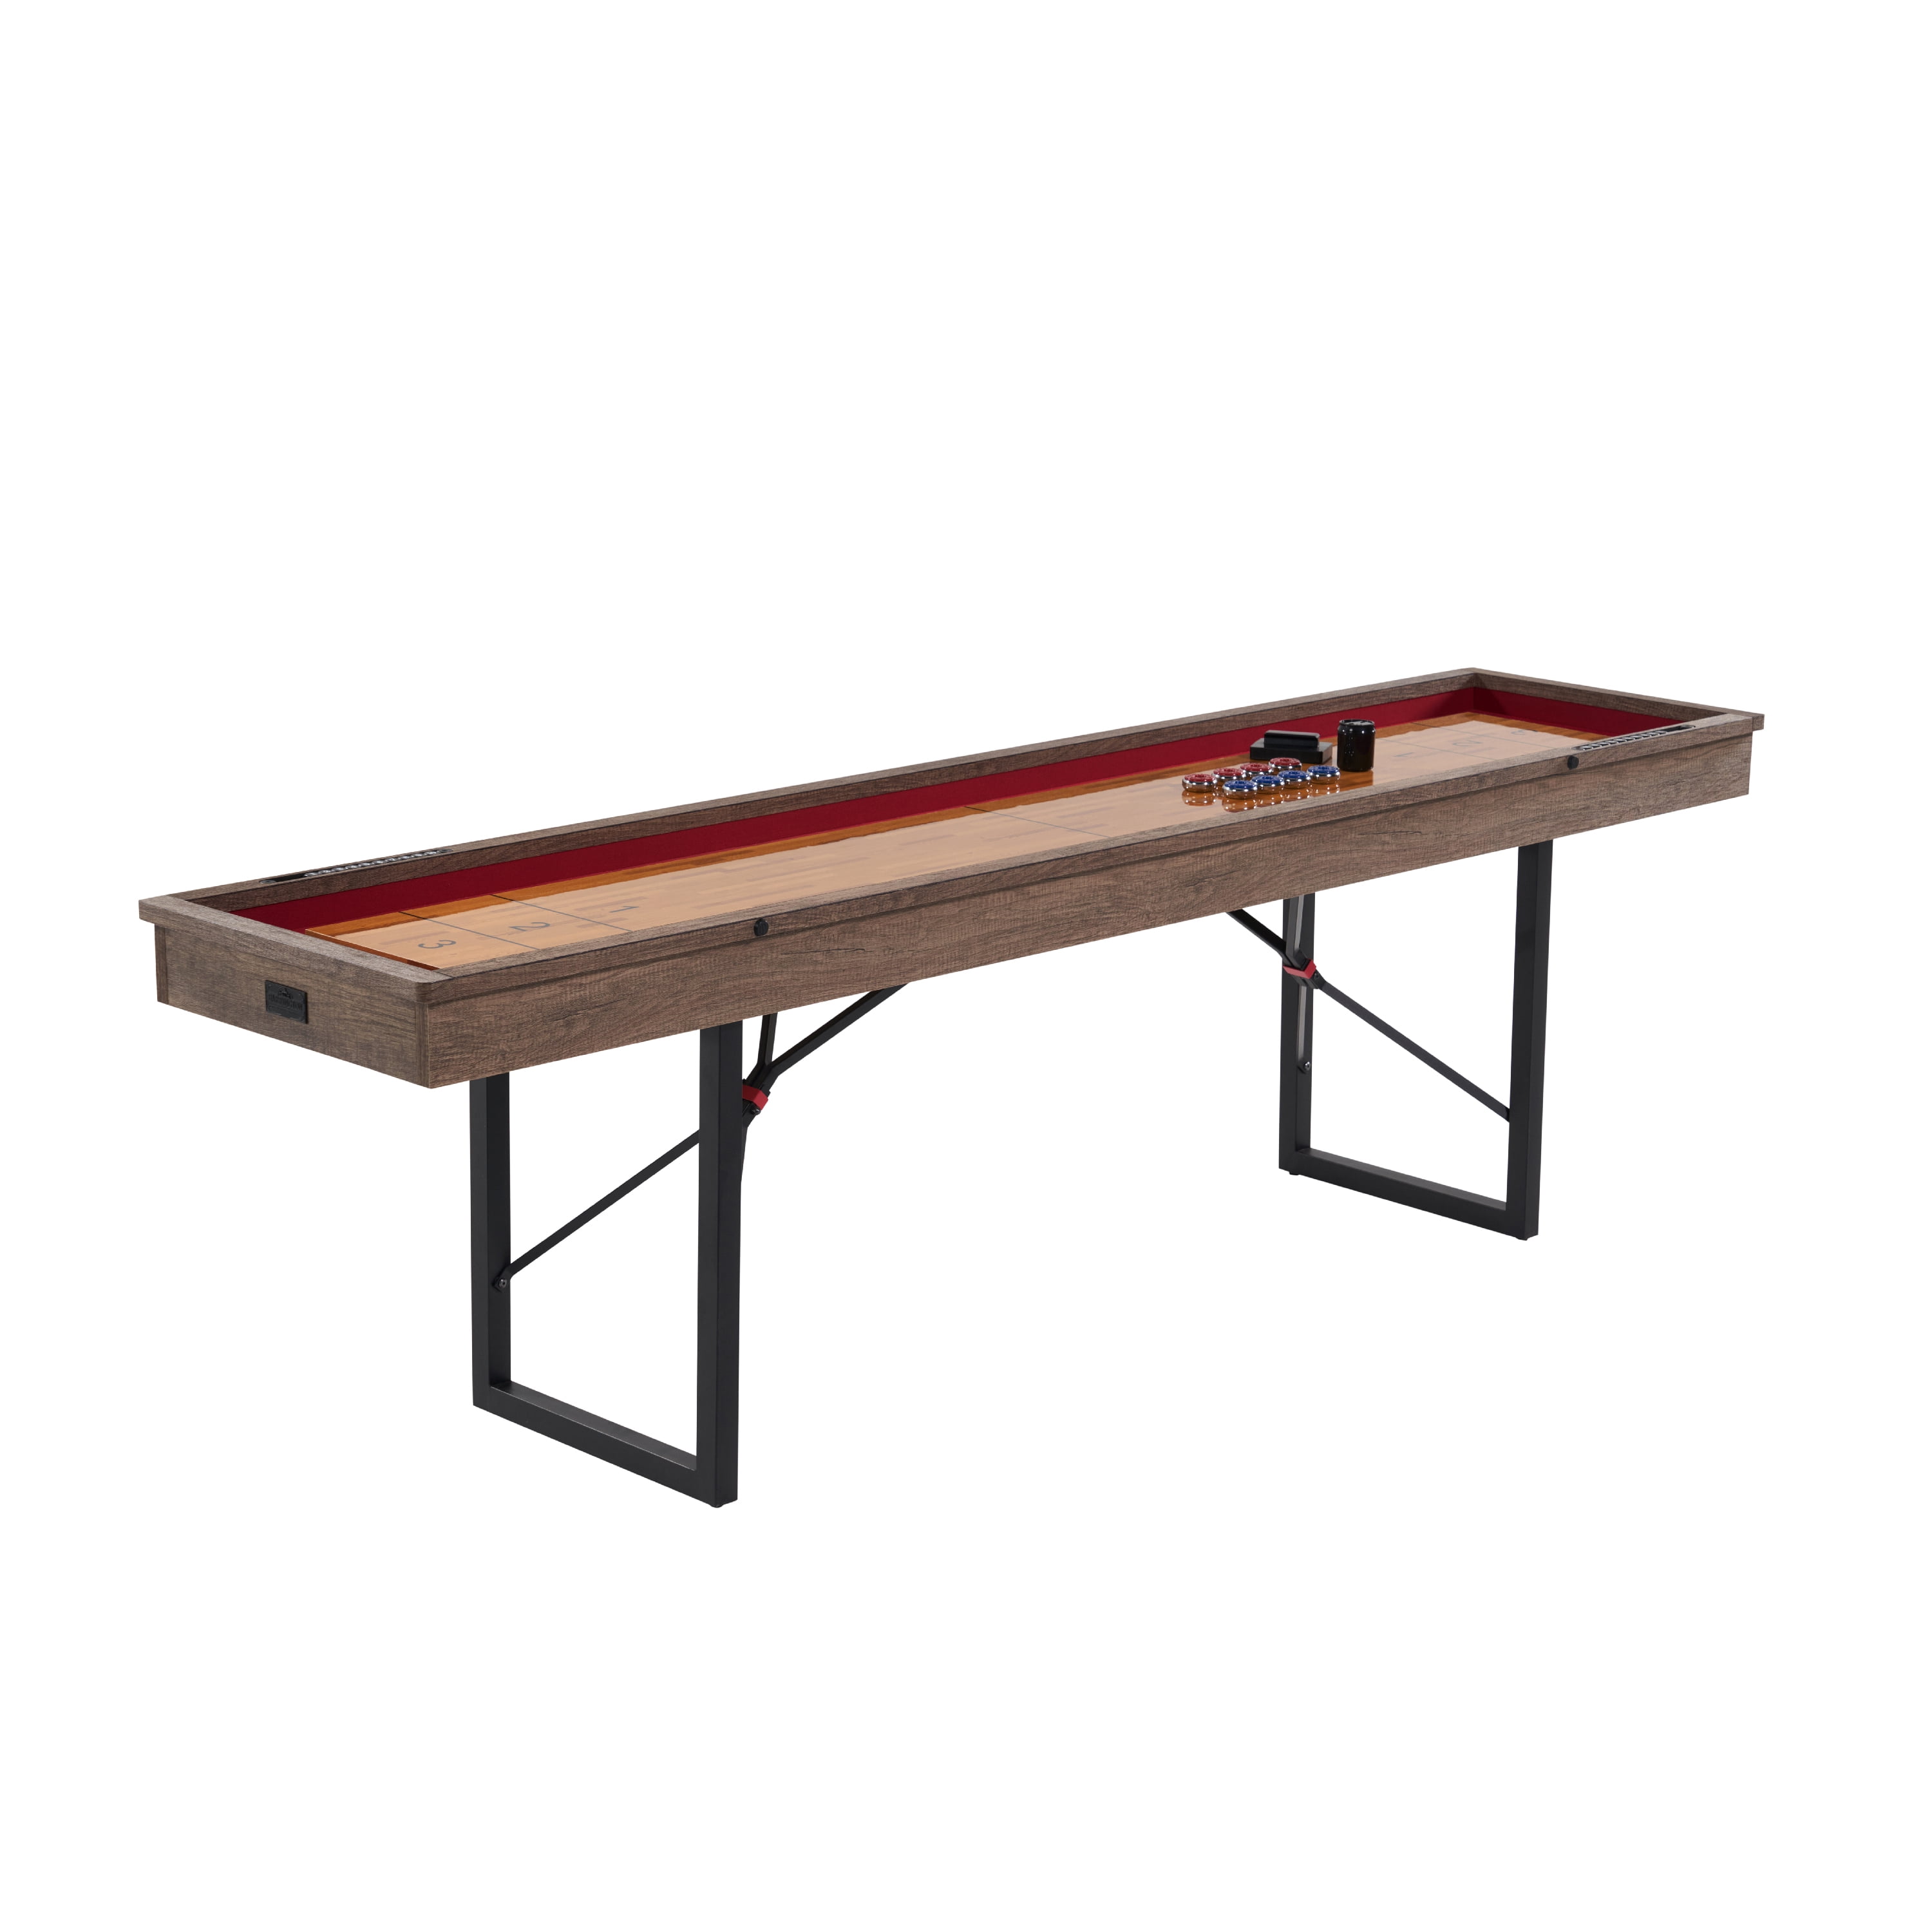 Wooden Bead Score System for Shuffleboard Games Wall Mounted or Movable Score Keeper with Cabinet 